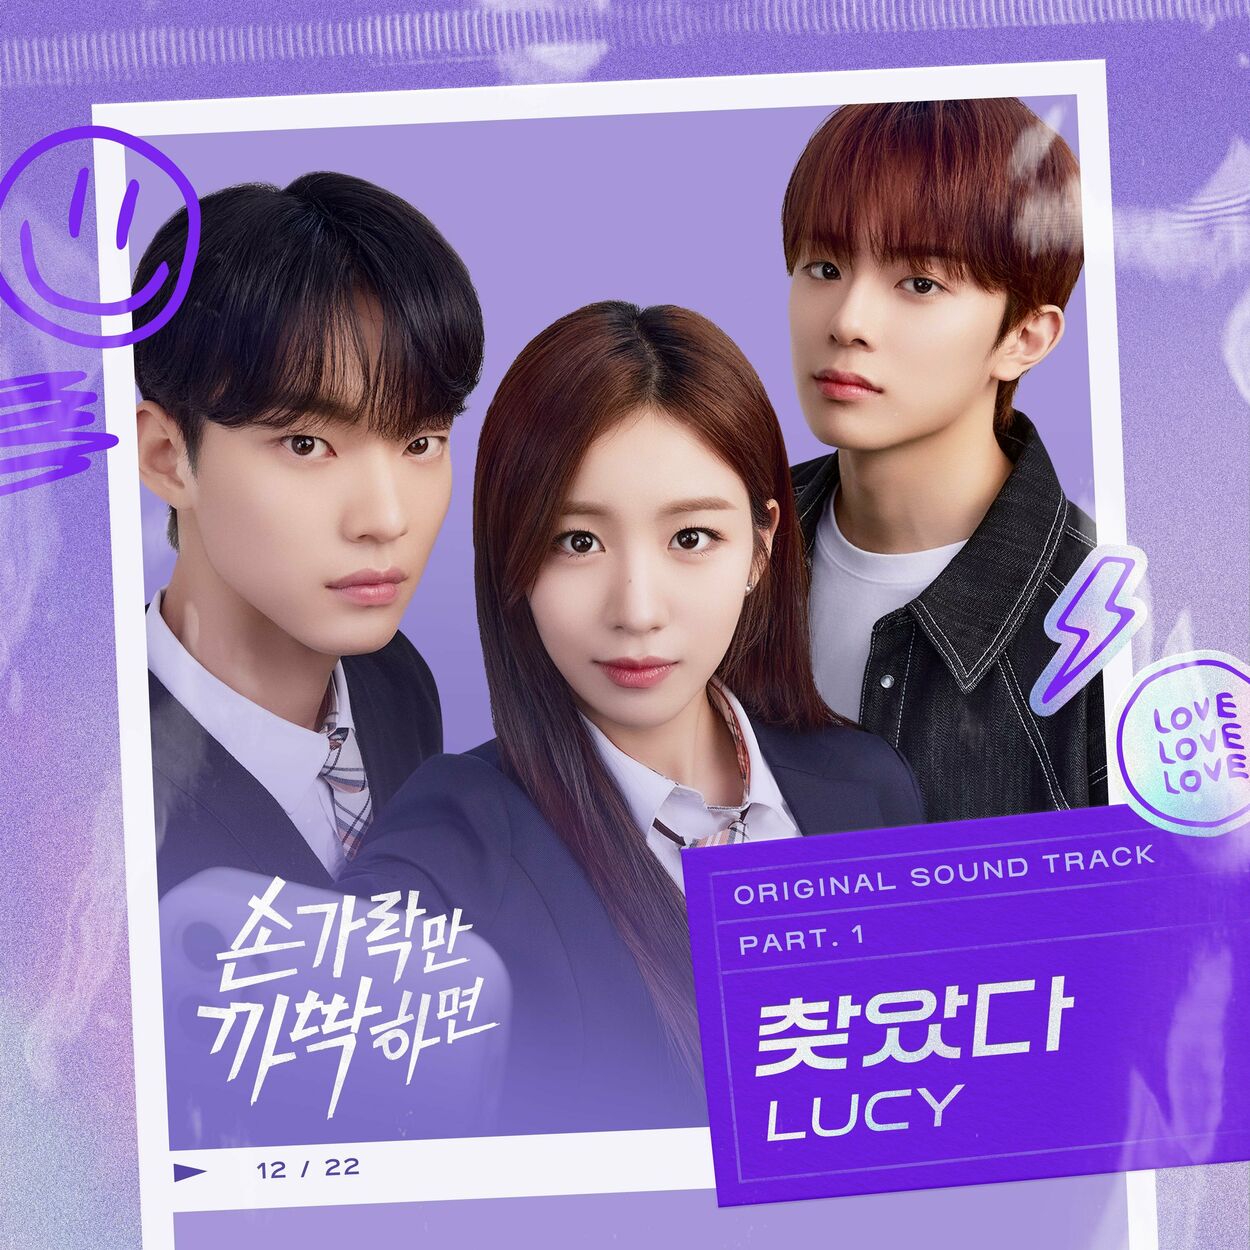 Lucy – Snap and Spark OST Part.1